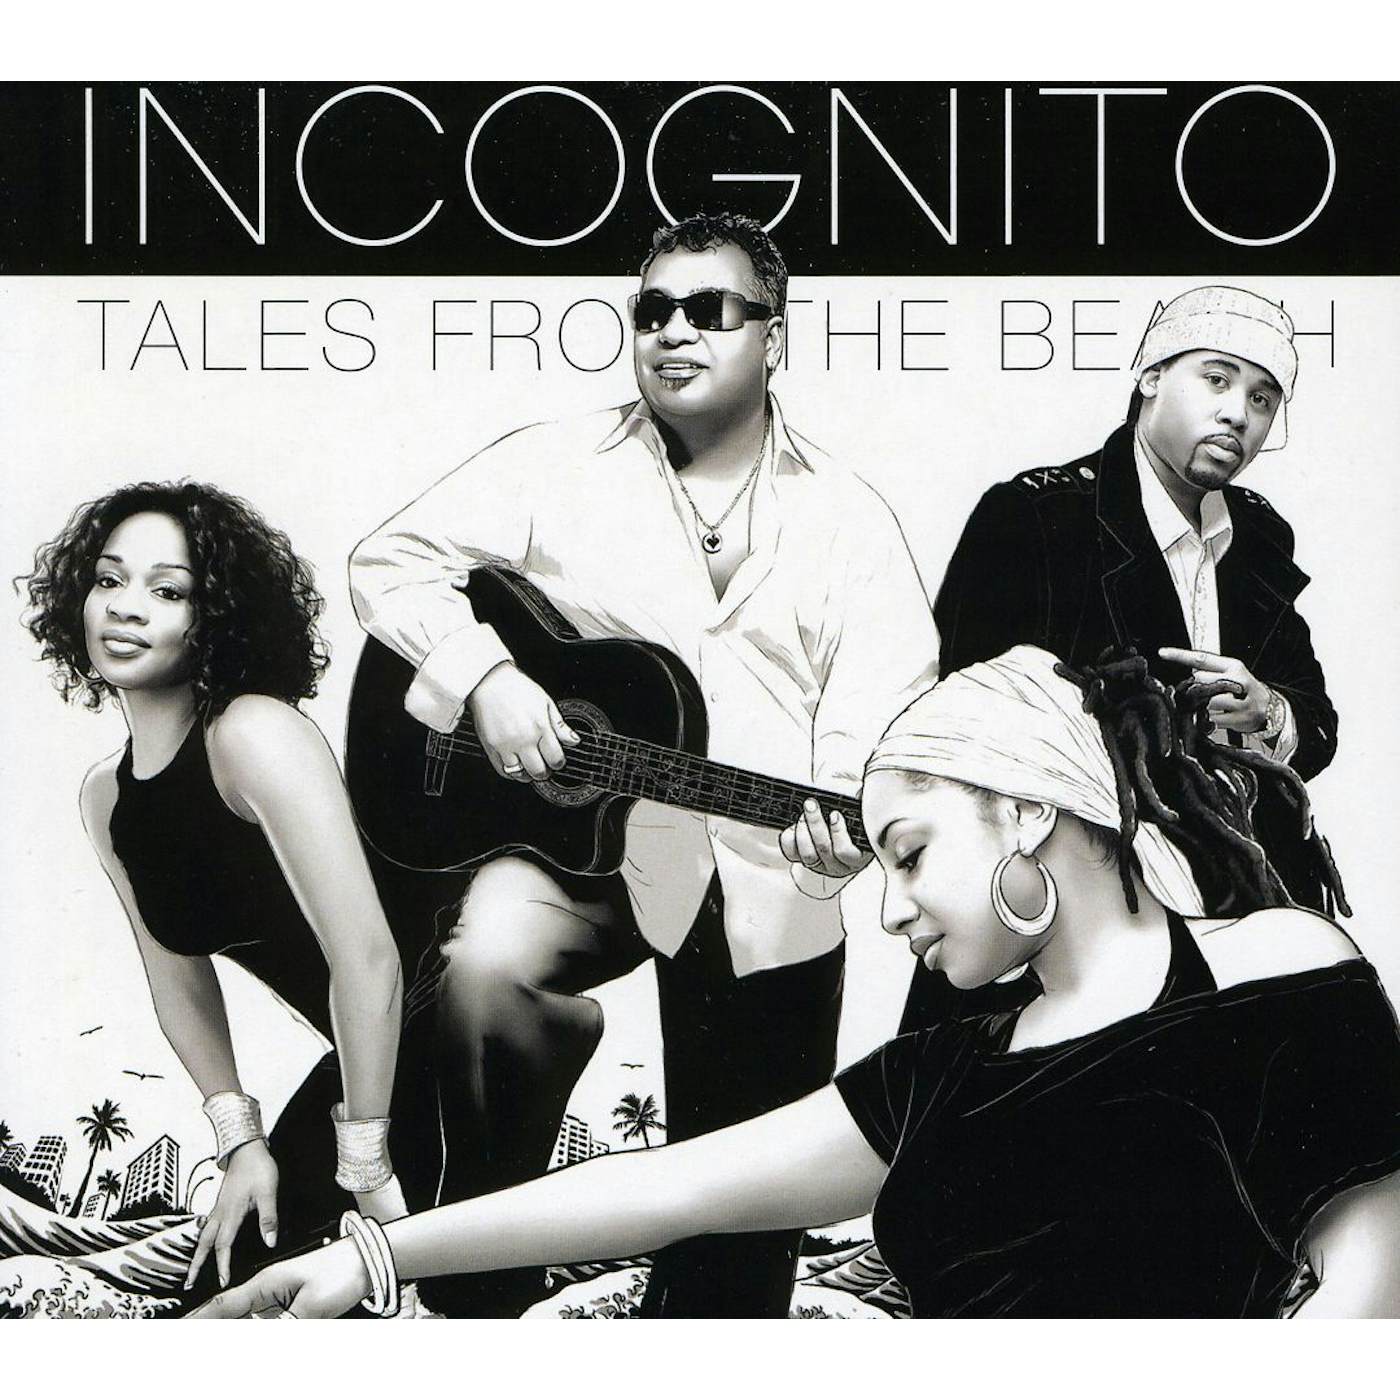 Incognito TALES FROM THE BEACH & CD